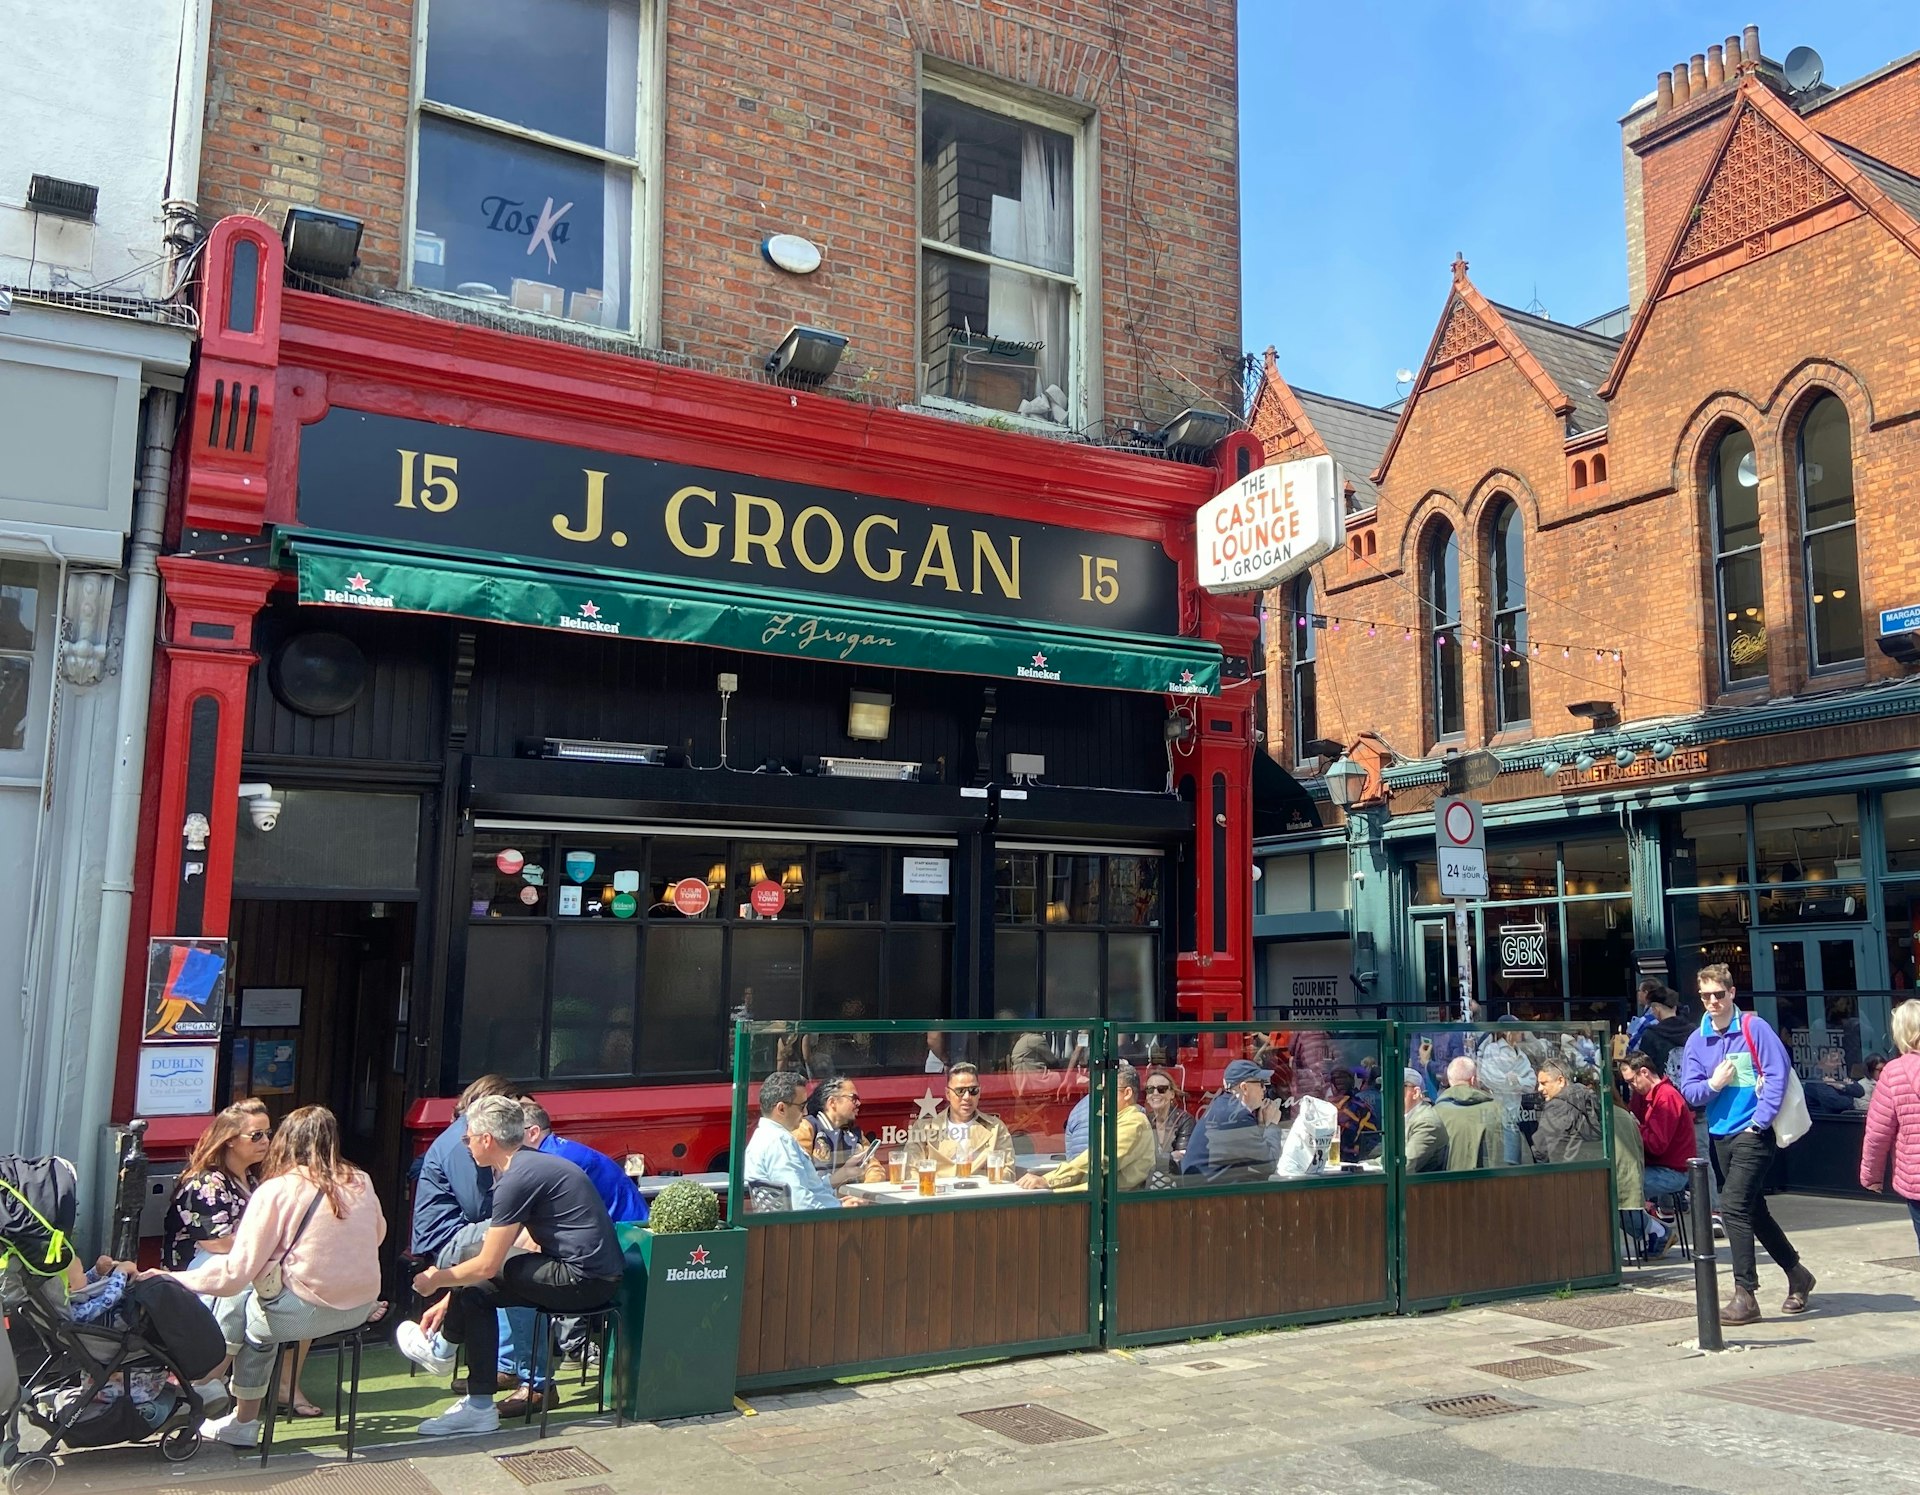 Exterior of Grogans pub in Dublin with people gathered on the sunny front terrace